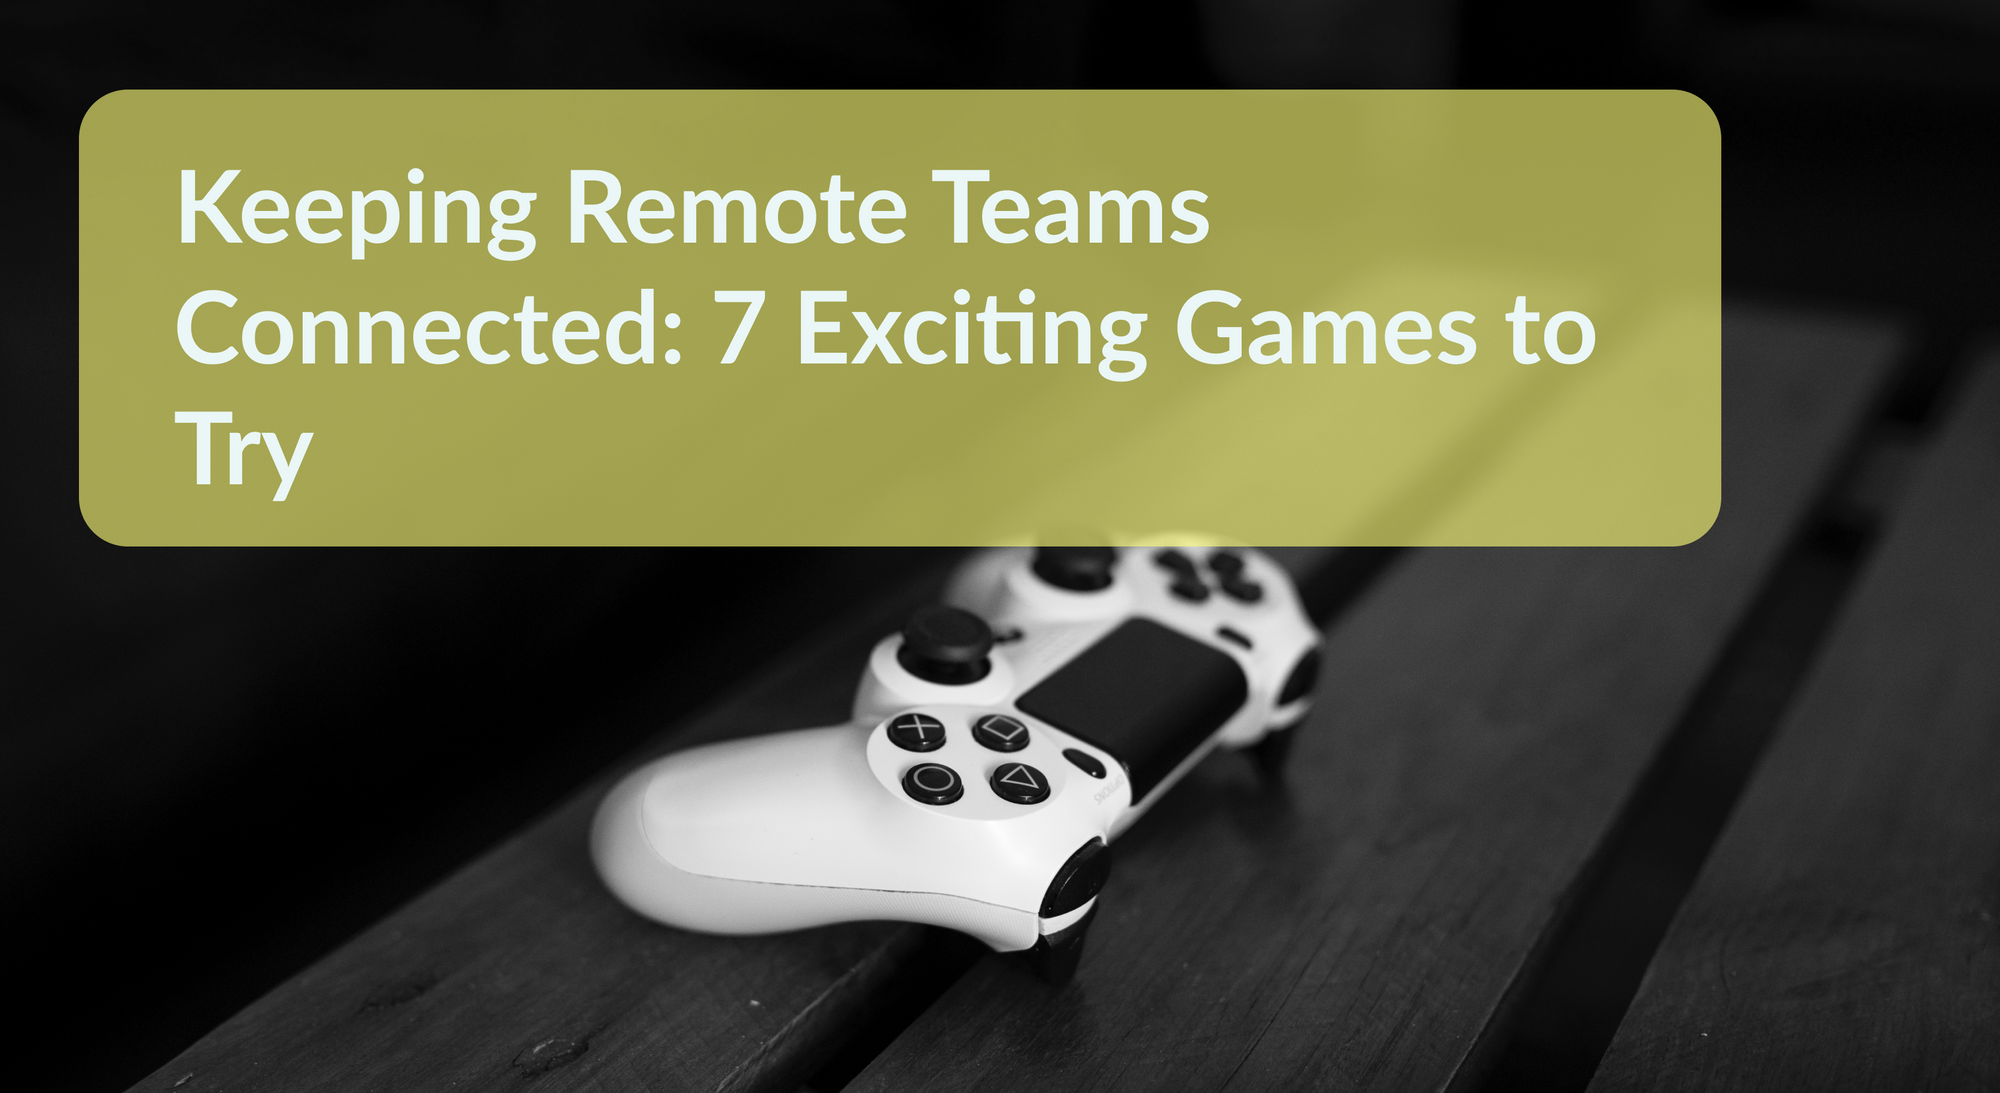 Keeping Remote Teams Connected: 7 Exciting Games to Try